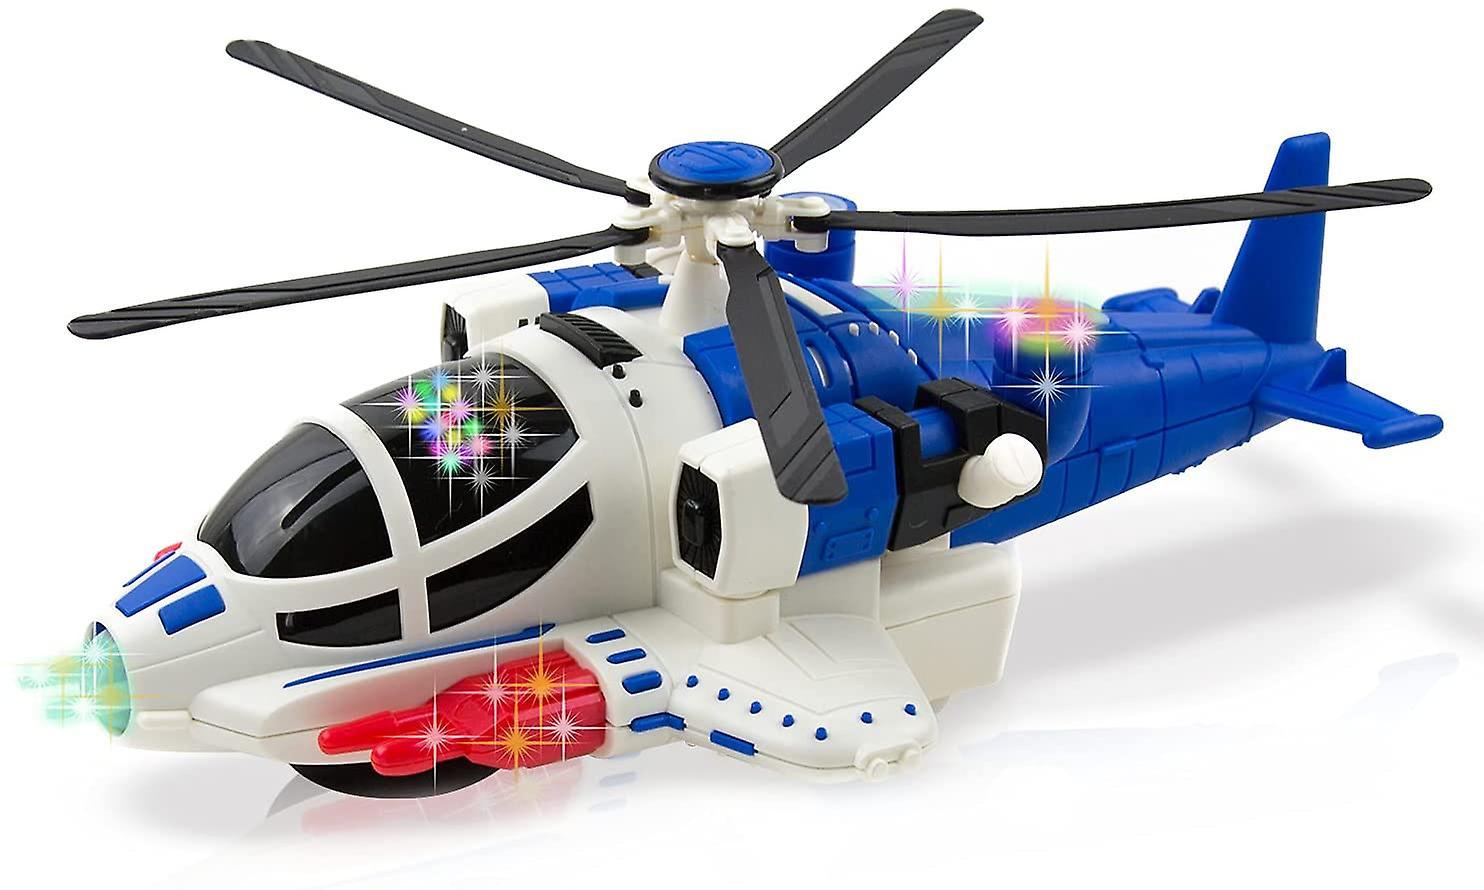 Khelna Helicopter: Engaging and durable - the perfect toy for children and adults alike